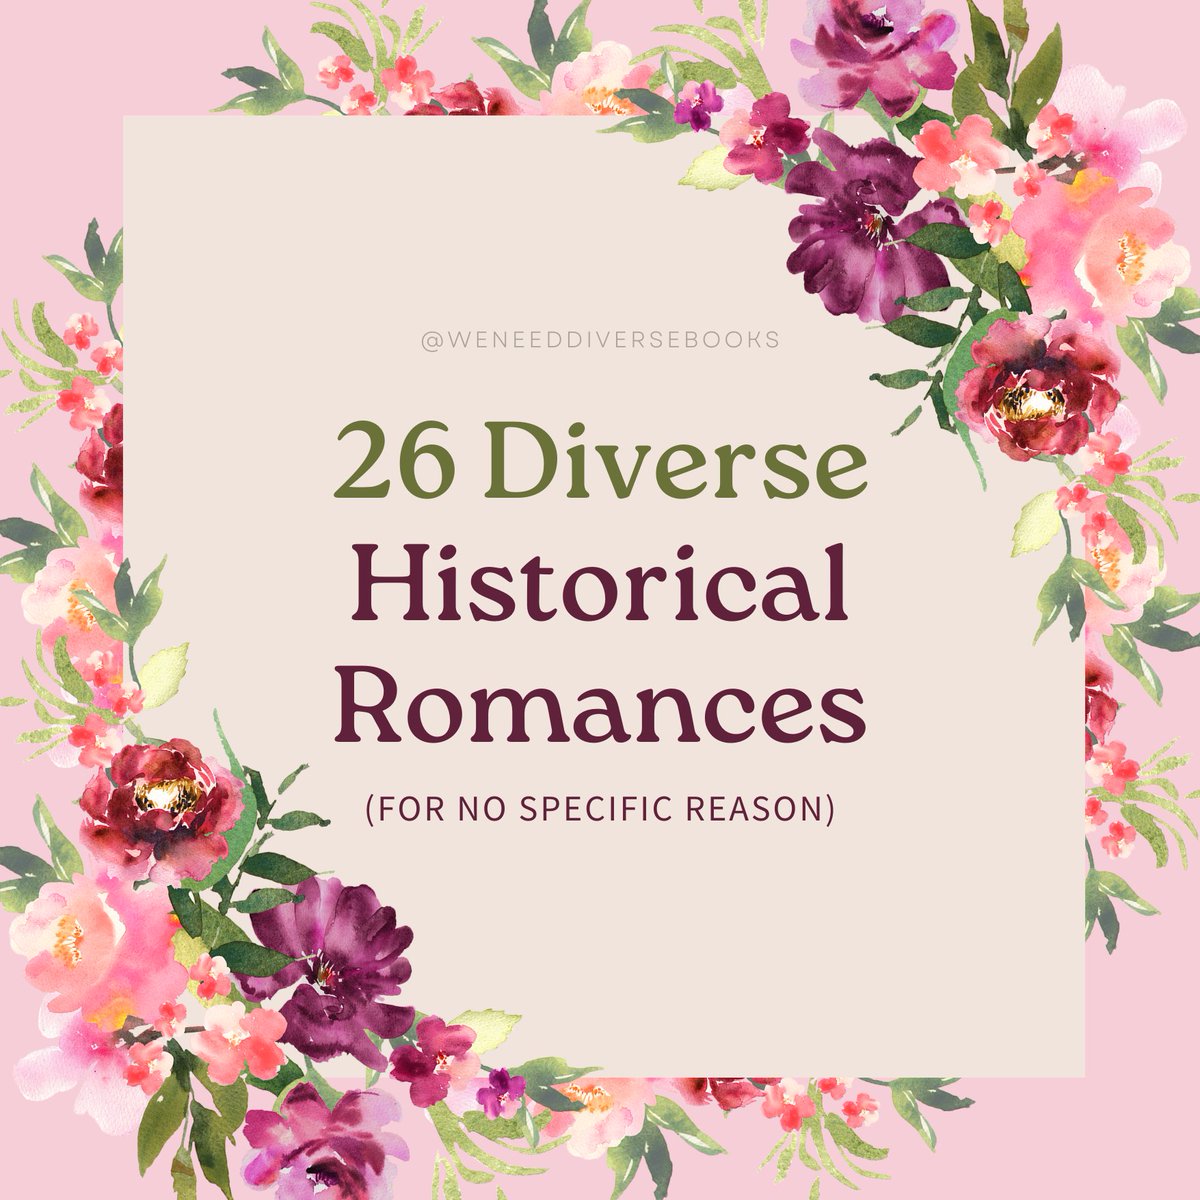 These diverse historical romances are the object of all our desires 😍🌹 If a certain historical romance series has you in a tizzy and scouring your shelves for similar stories, we’ve compiled a 🧵 of 26 diverse historical romance books for your reading pleasure!